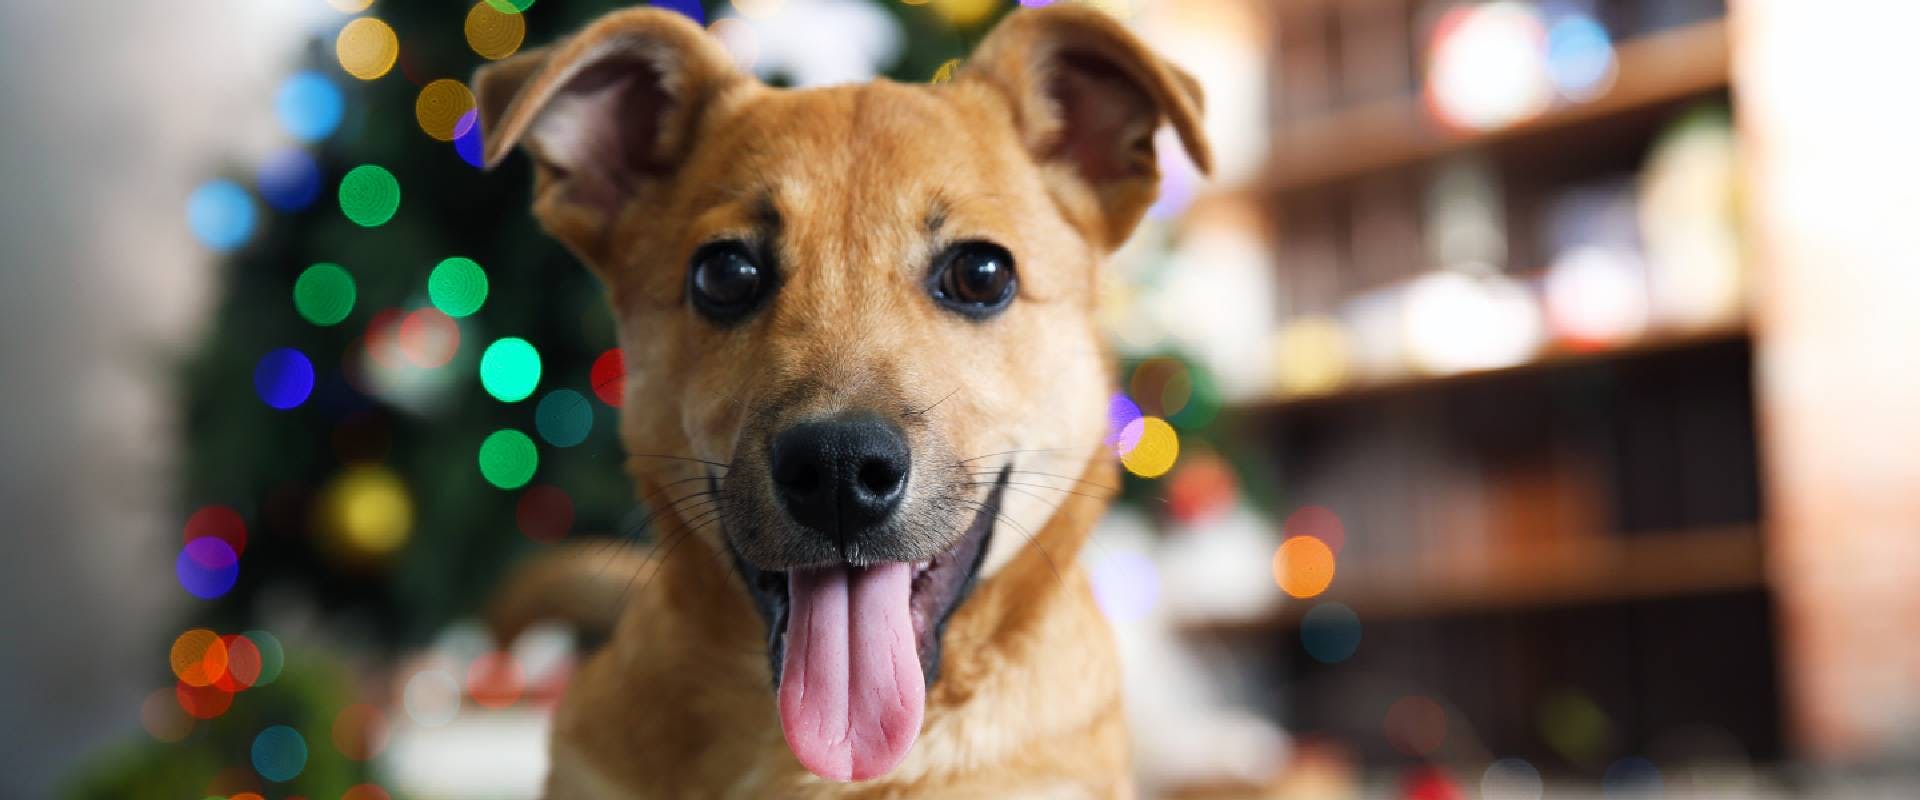 Close-up of a brown dog laying in front of a Christmas tree